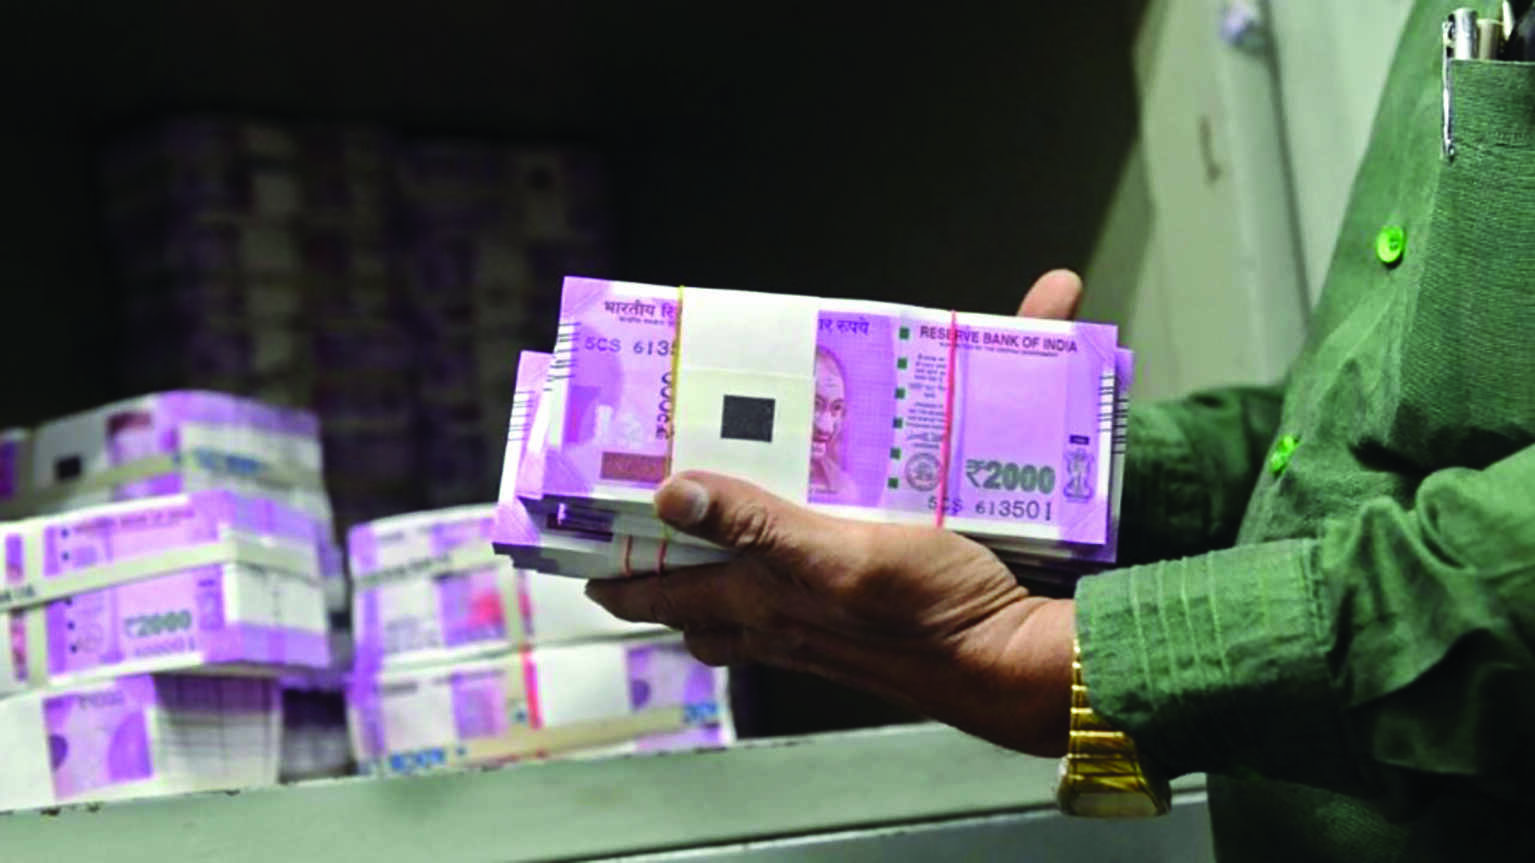 Rs 2000 currency accounts for just 1.6% of total notes in circulation at March-end